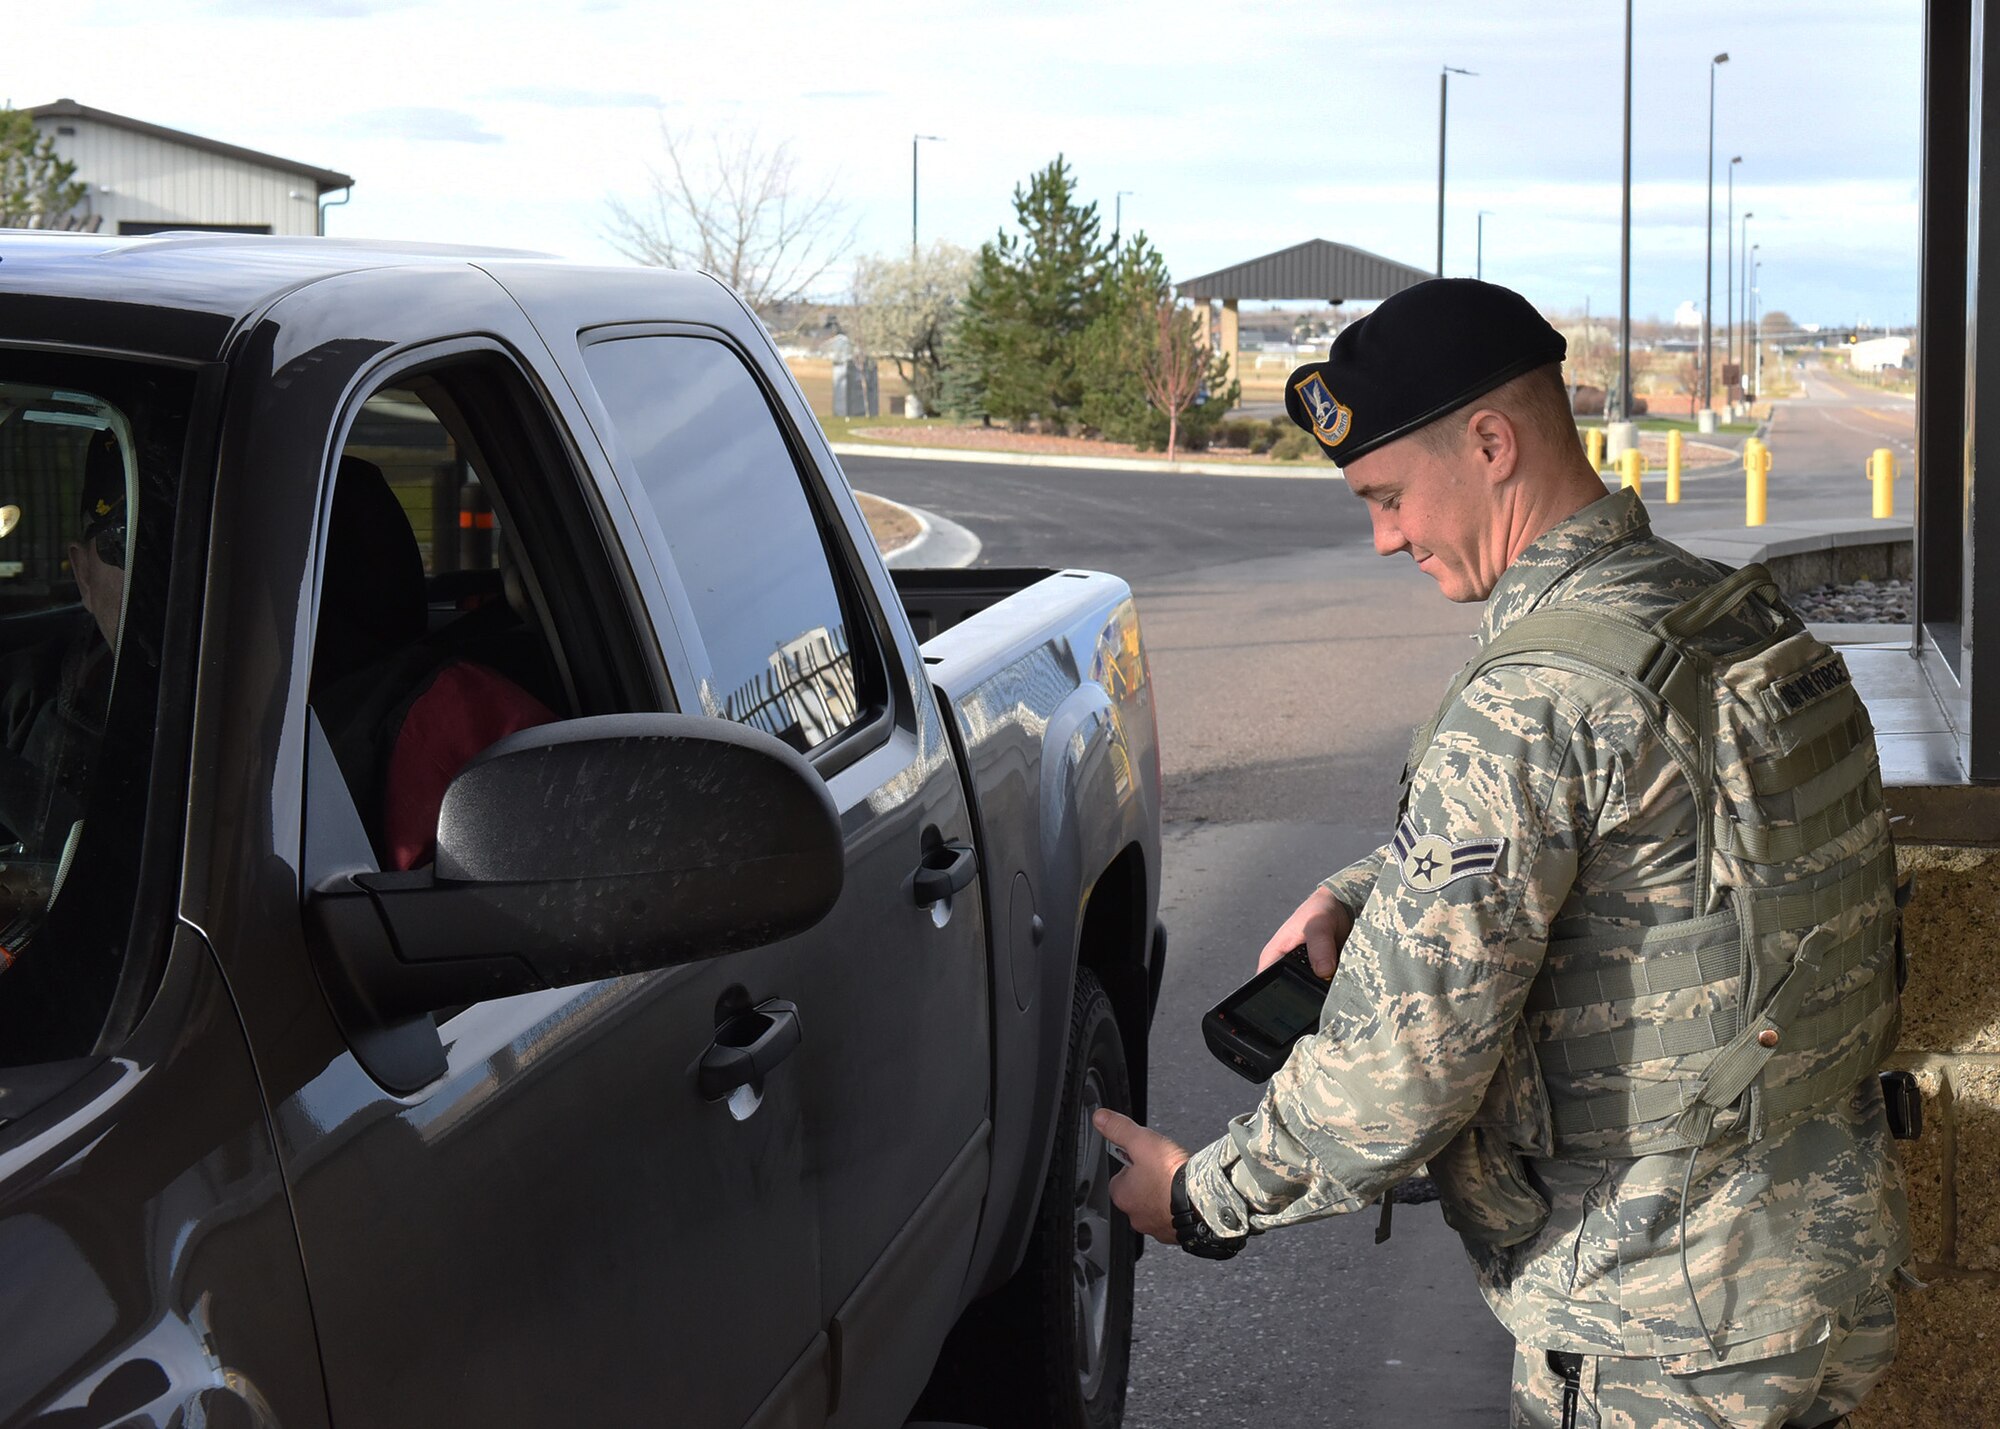 Airman 1st Class Dylan Kerns, 341st Security Forces Squadron member, checks identification cards for incoming visitors through the 10th Avenue North Access Gate at Malmstrom Air Force Base, Mont., Nov. 1, 2016.  The gate will serve as the permanent 24-hour main access gate starting on Nov. 5. (U.S. Air Force photo/Jason Heavner)